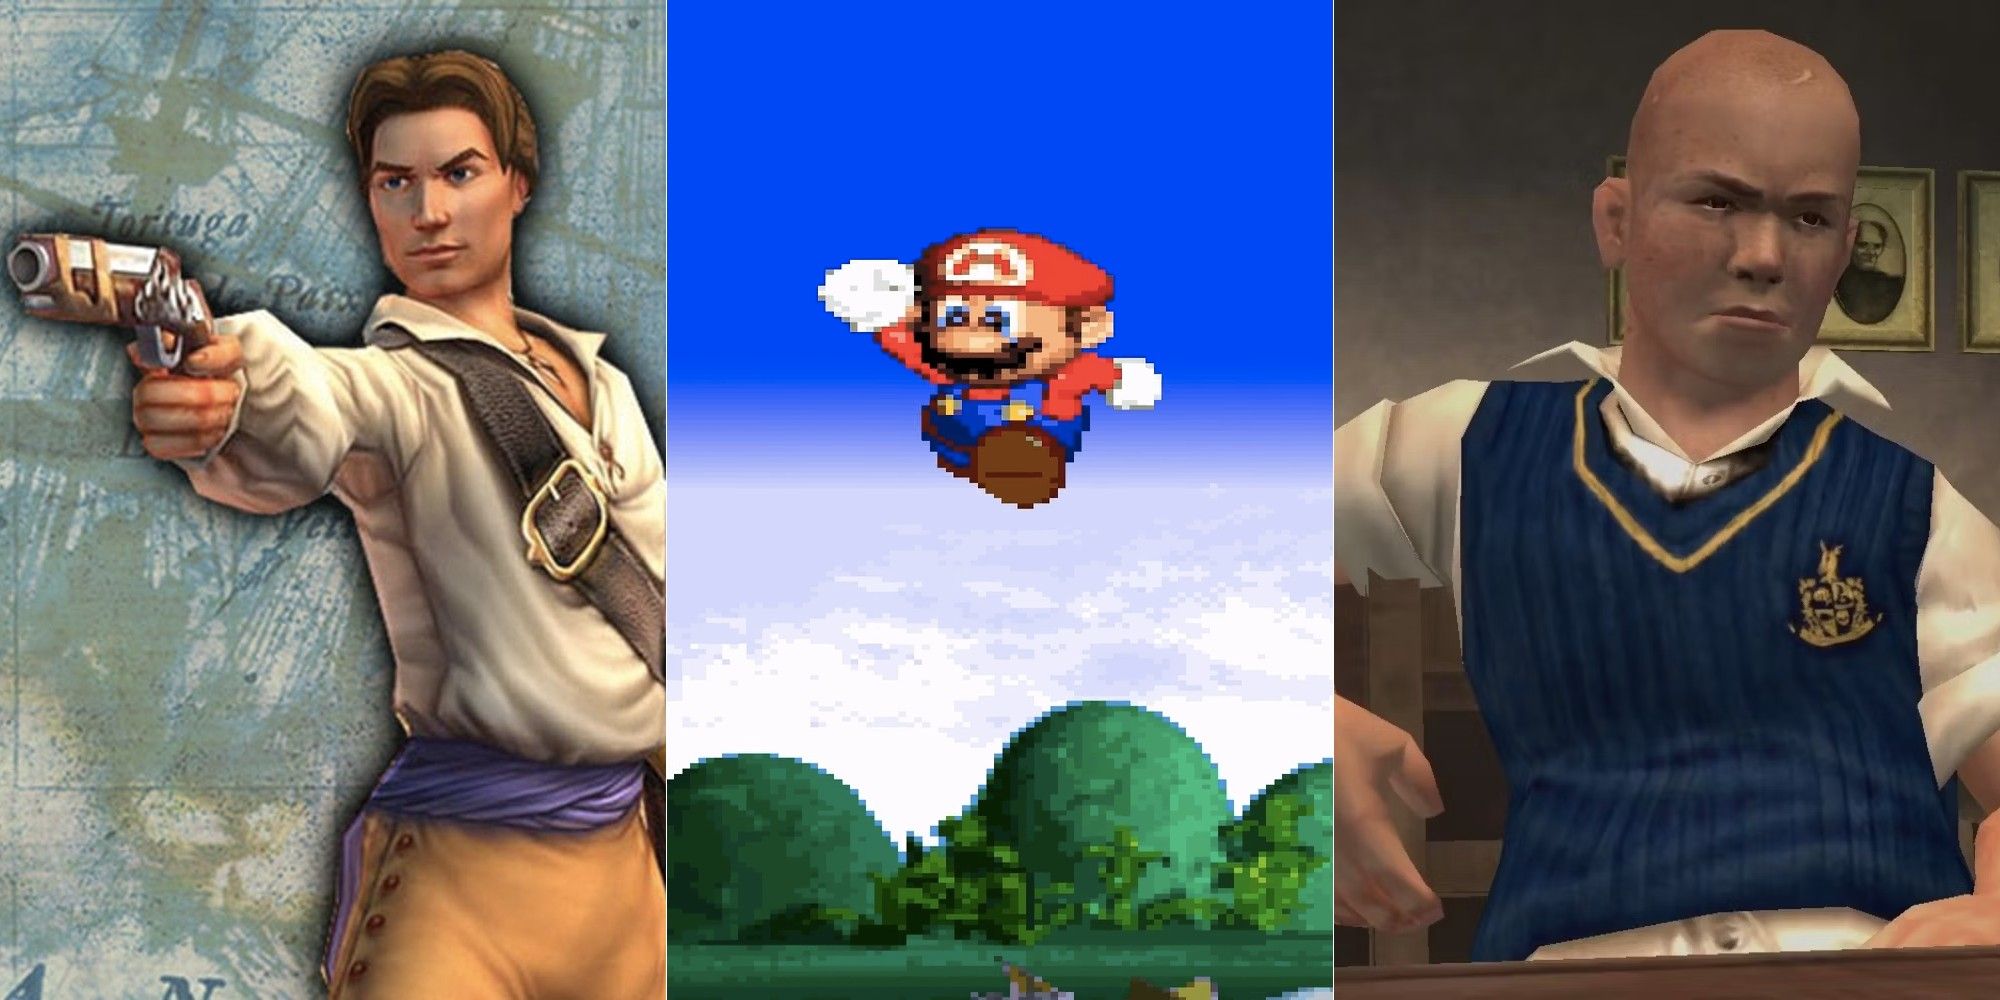 Sid Meier's Pirates protagonist with a gun, Super Mario RPG Mario jumping, and Bully protagonist Jimmy sitting looking disgruntled.